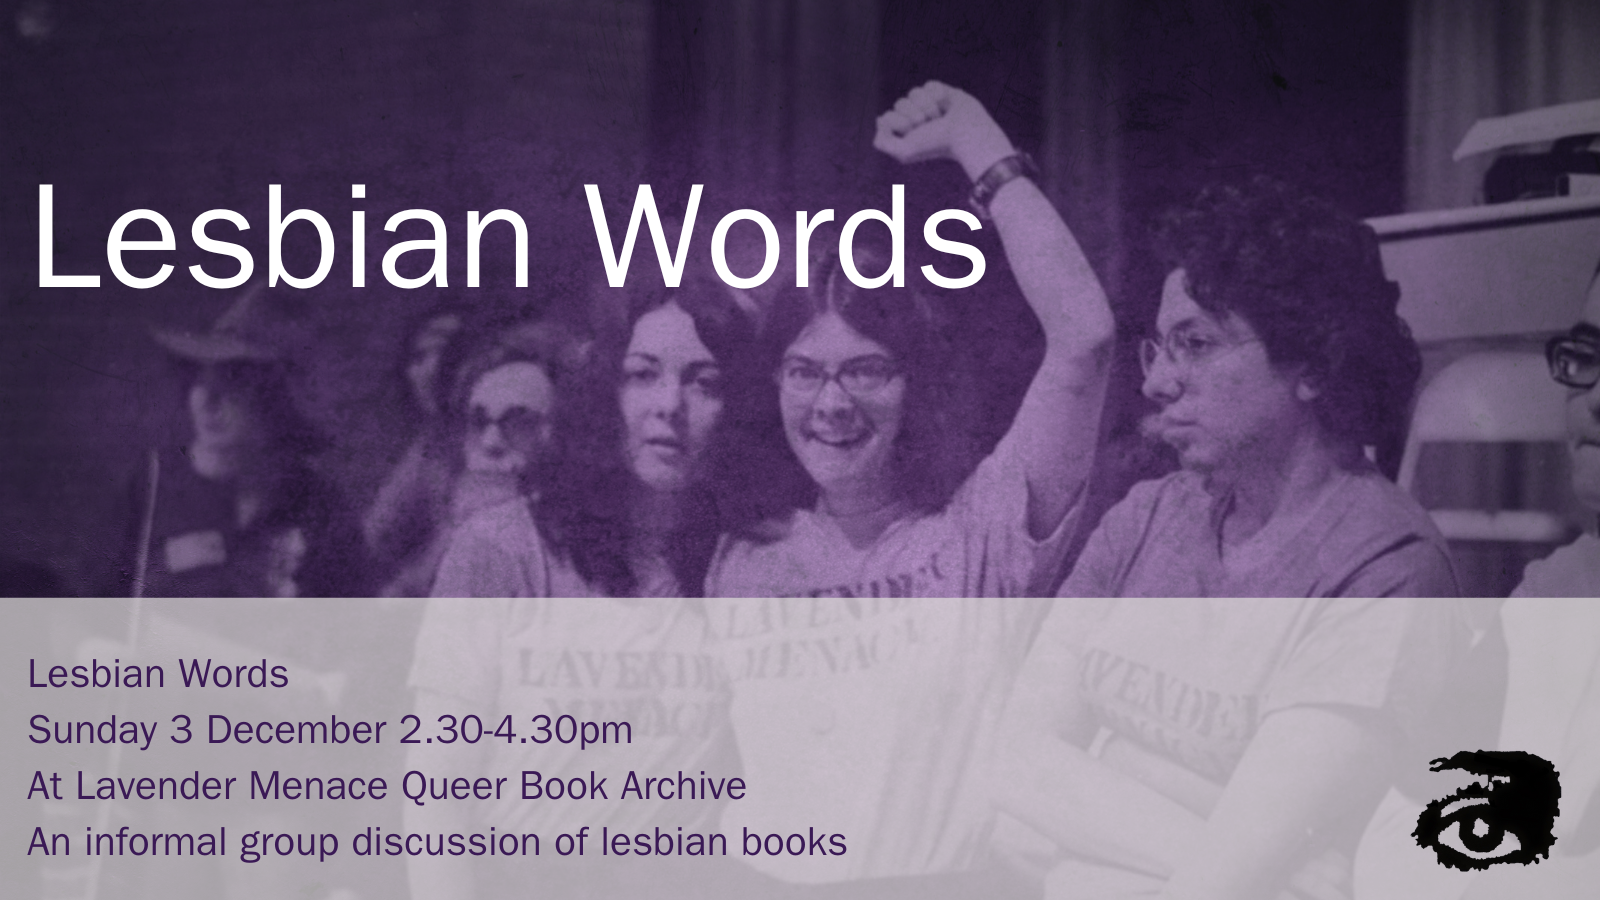 Decorative - Lesbian Words - image of Lavender Menace group at the Second Women's Congress